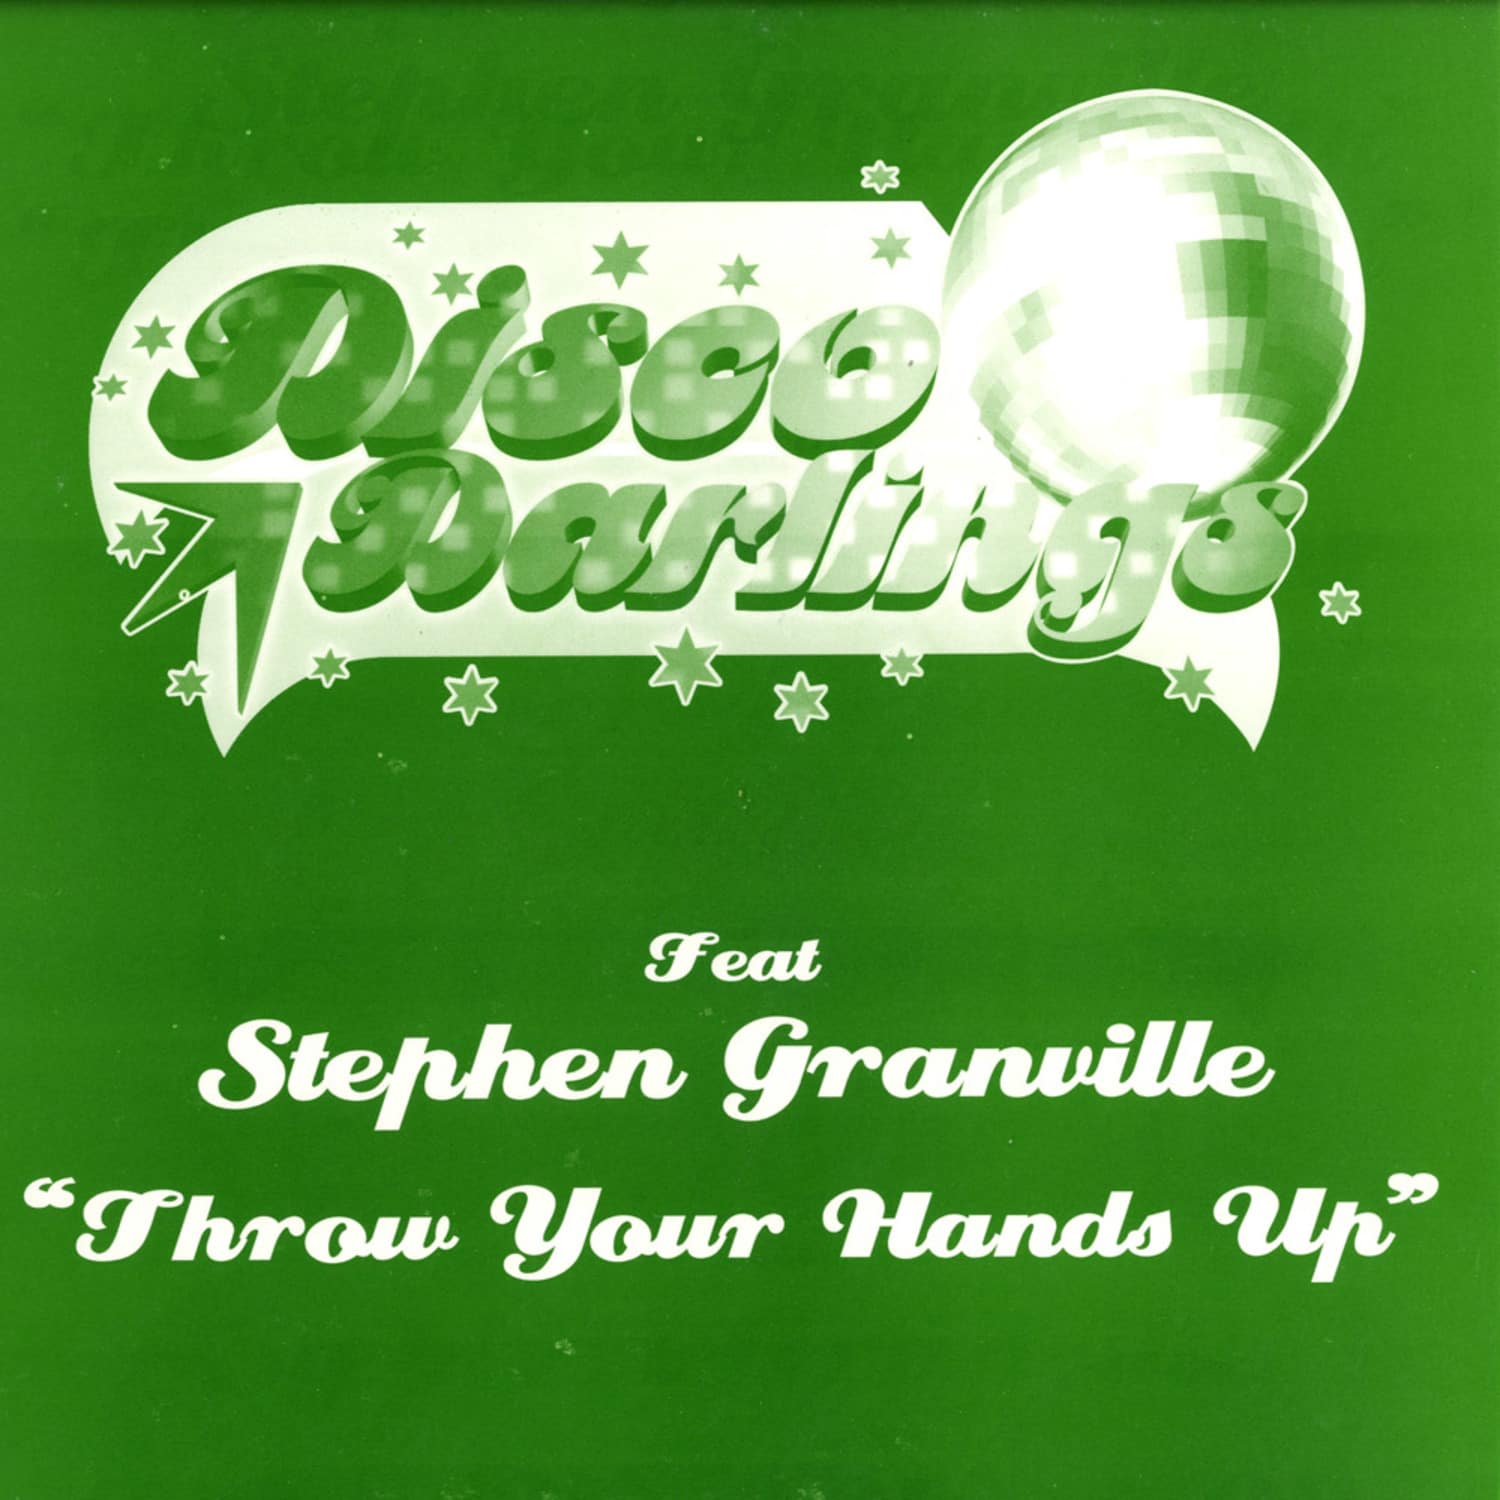 Disco Darlings feat Stephen Granville - THROW YOUR HANDS UP